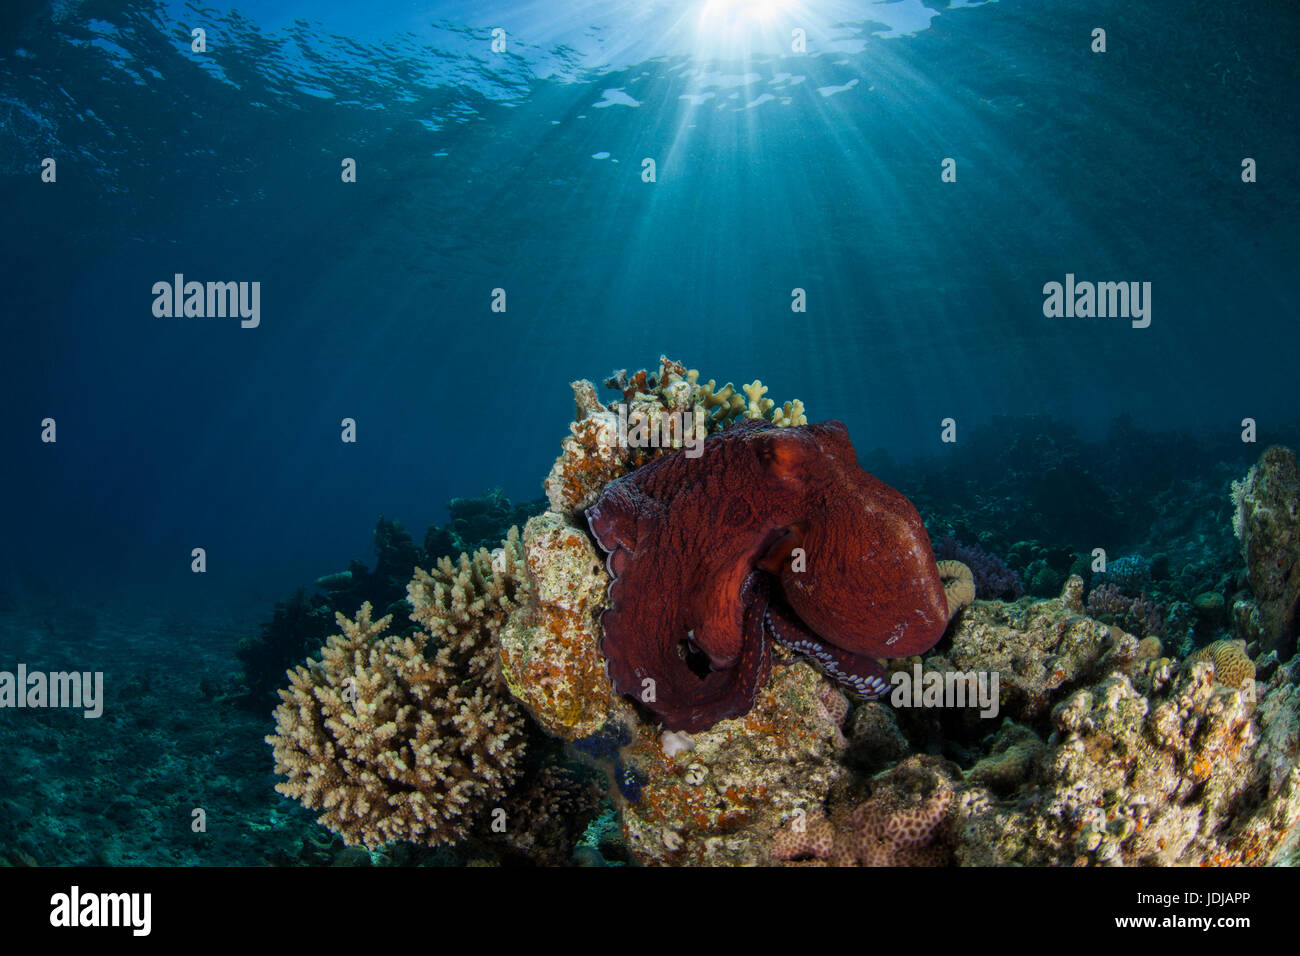 Octopus on a rock Stock Photo